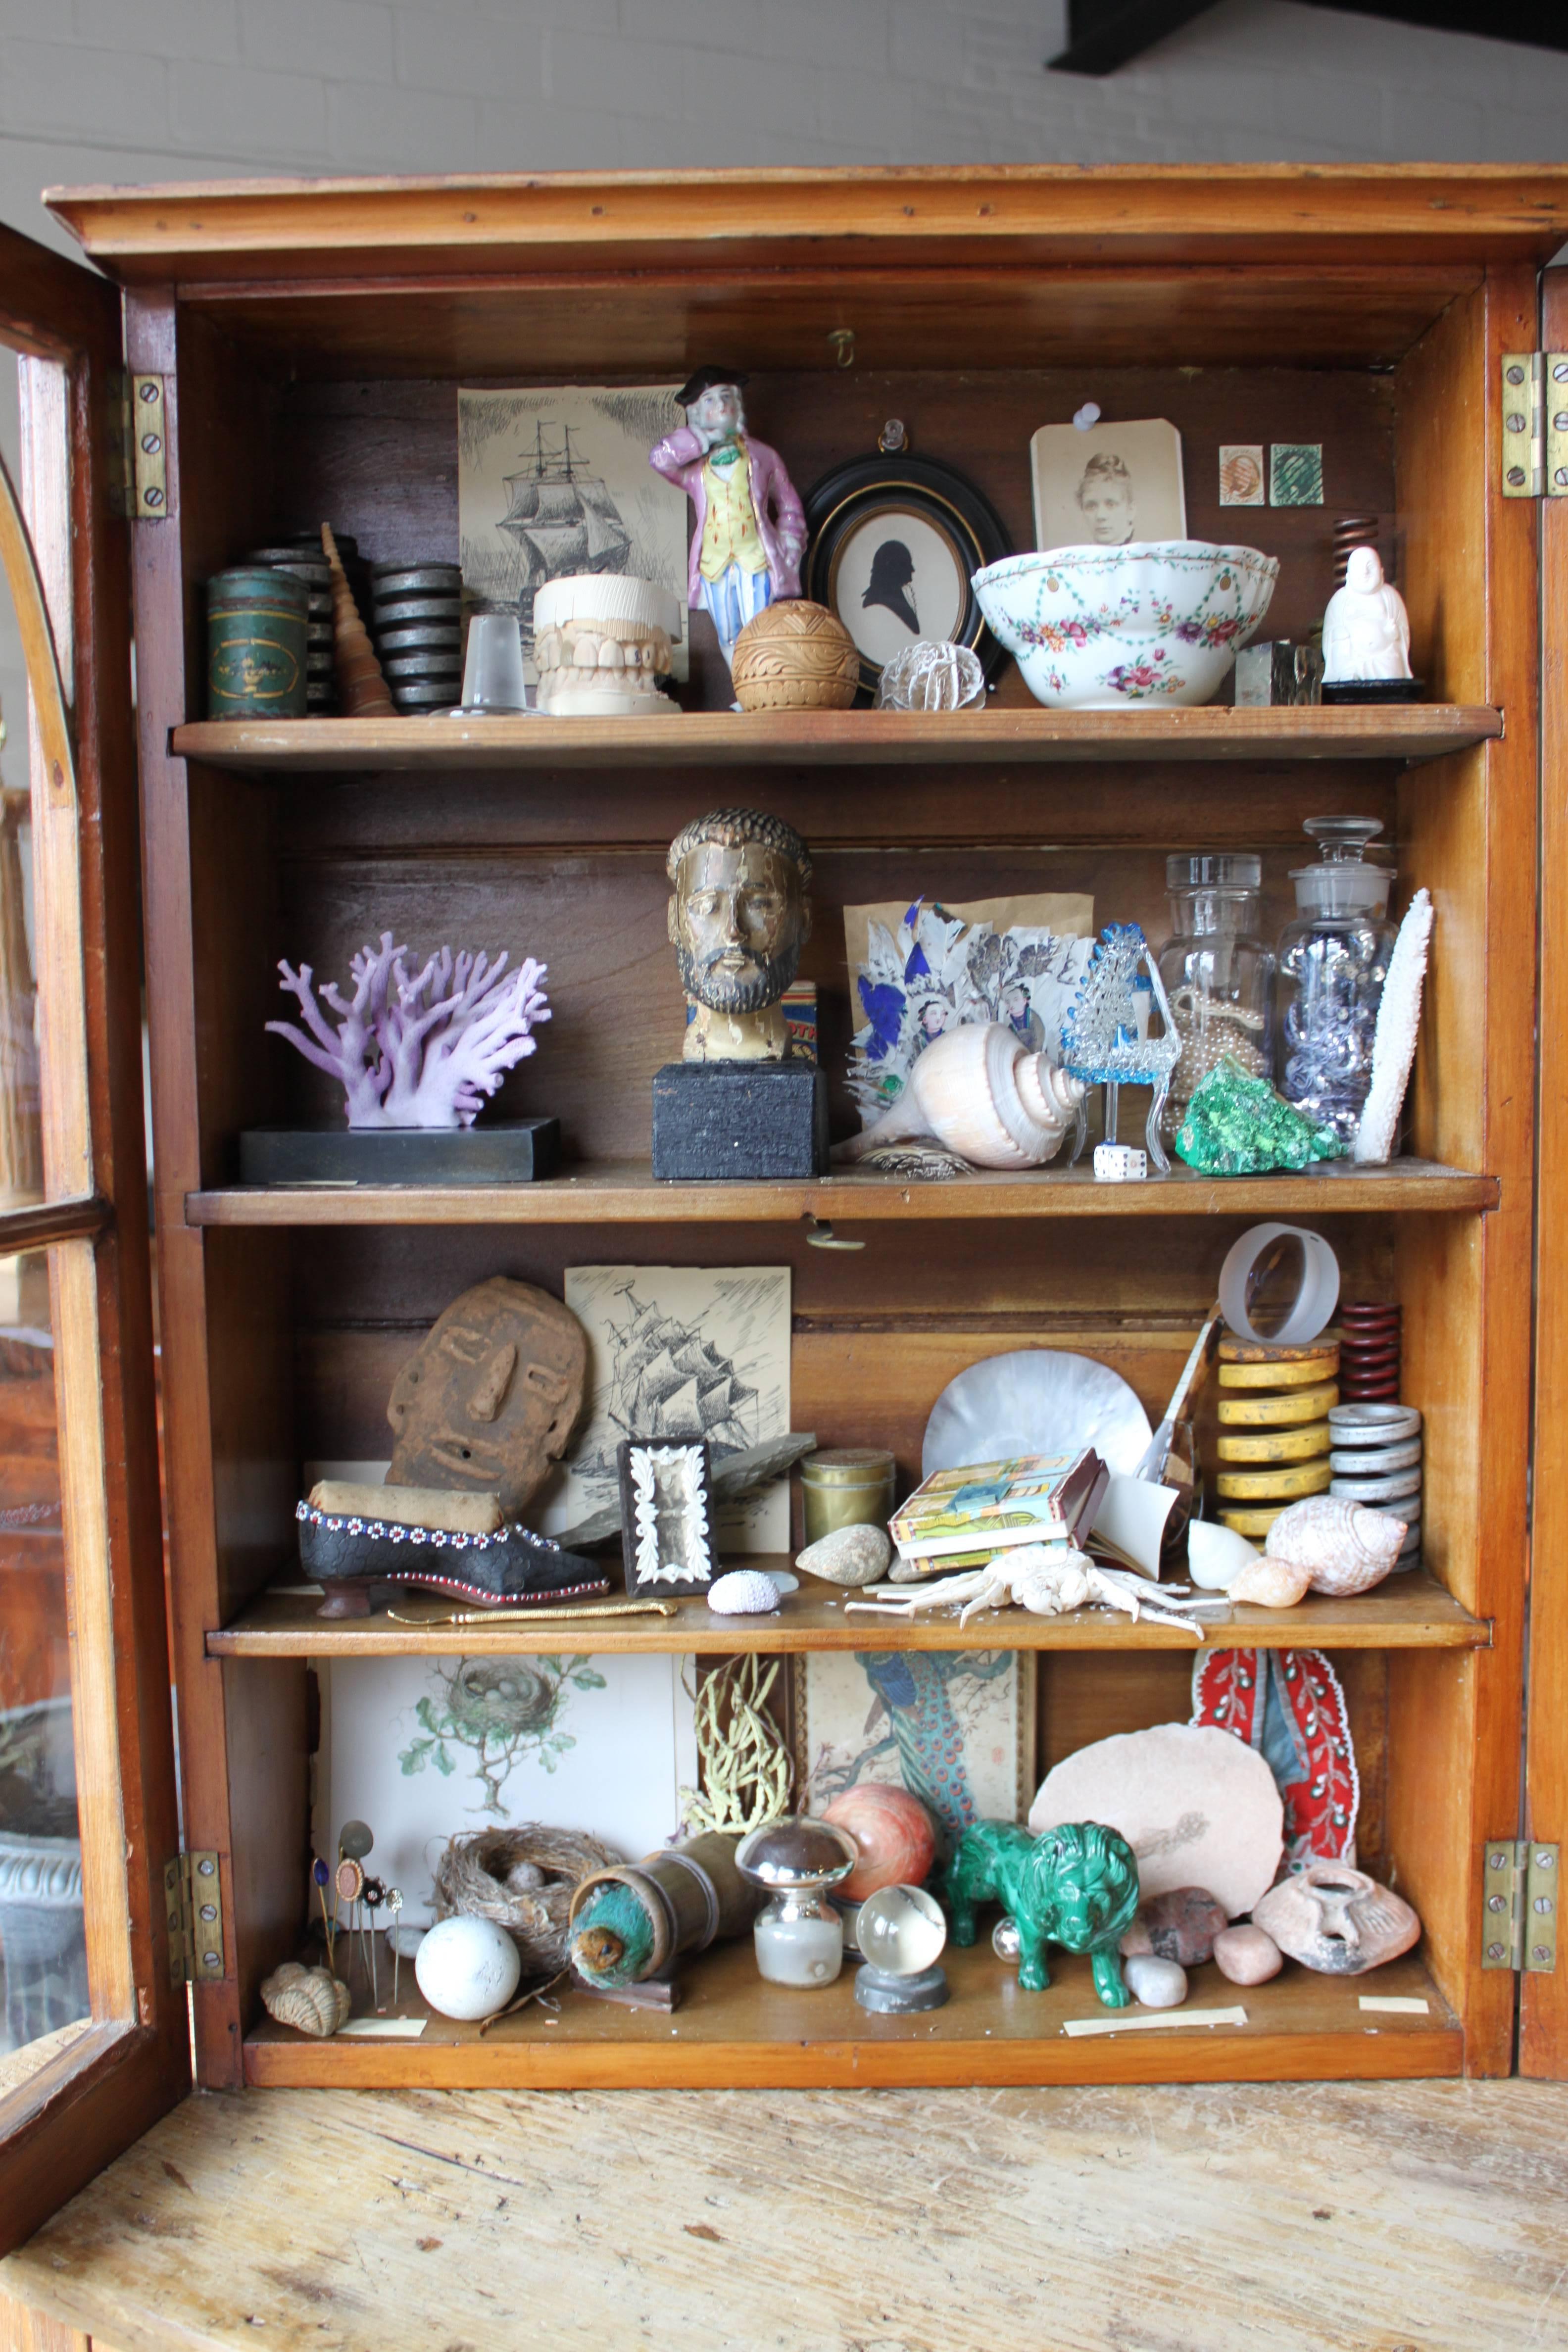 Curiosity cabinet #1 created by Keith Funston. 70 objects collection from various era and genre.